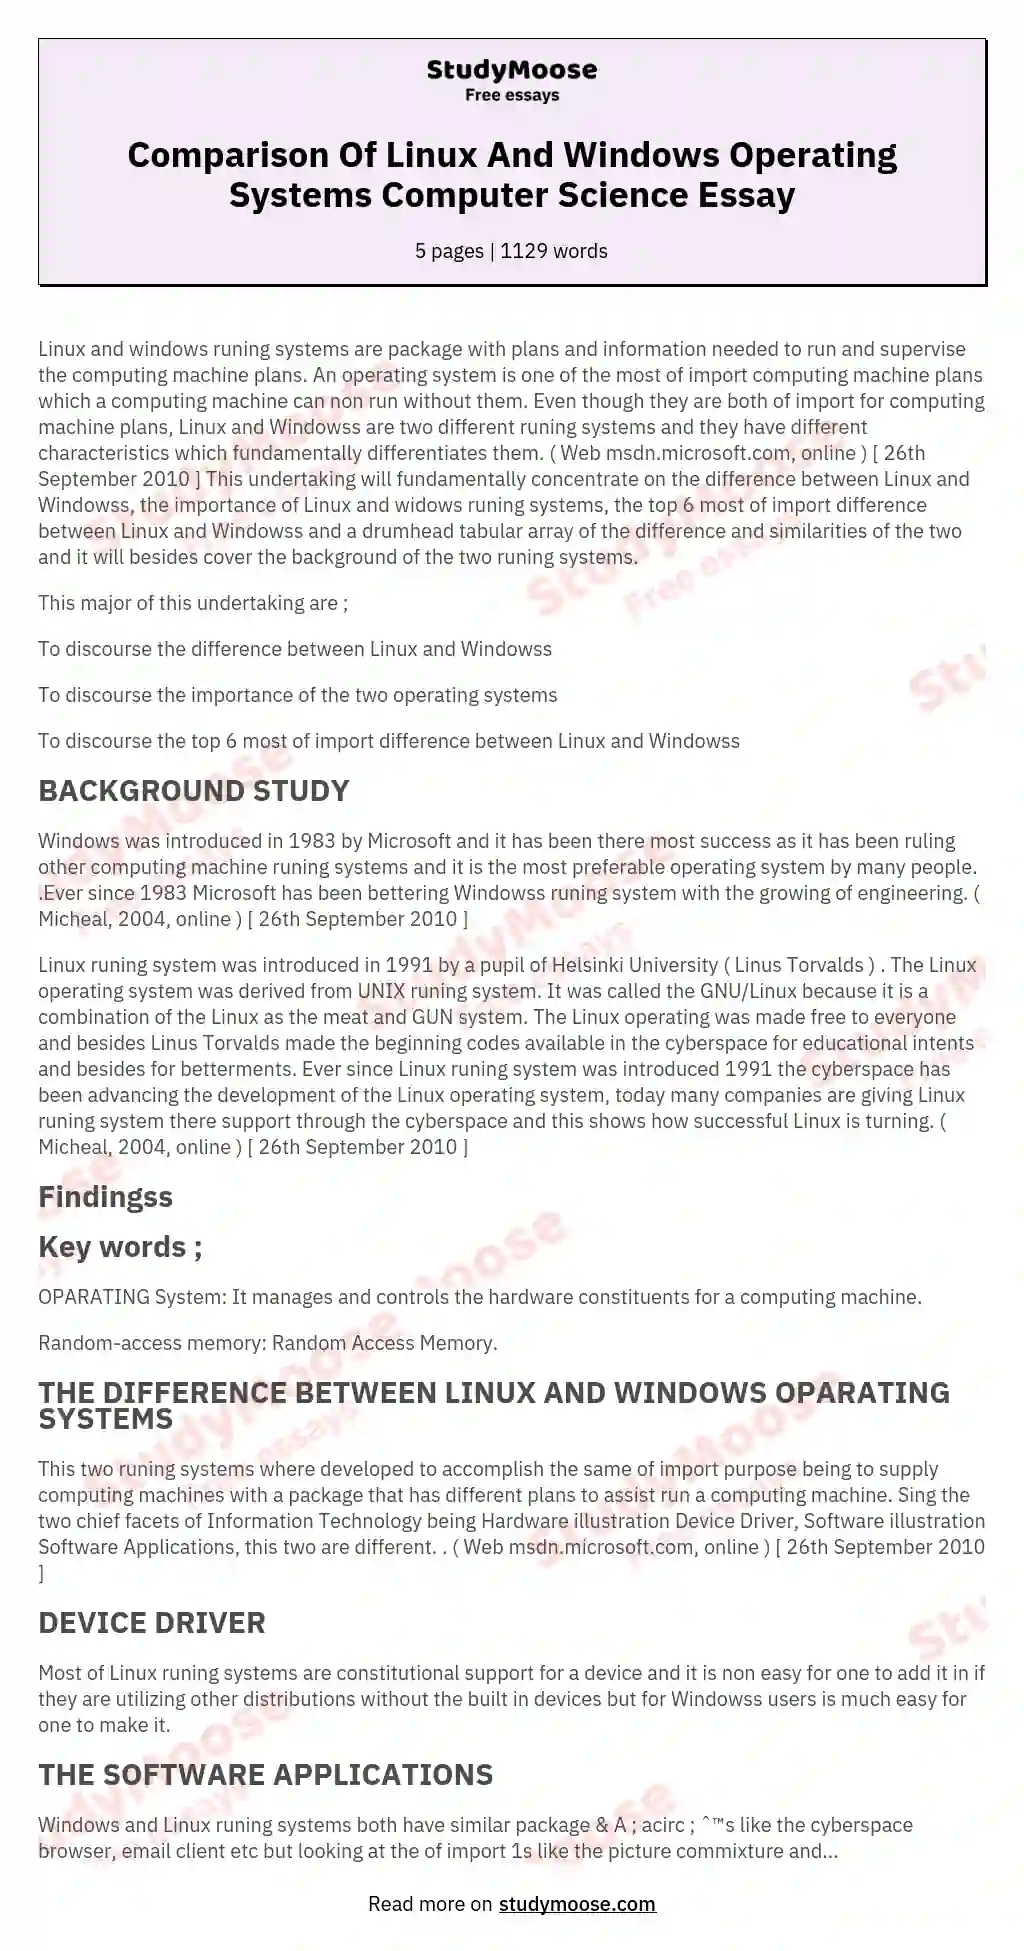 Comparison Of Linux And Windows Operating Systems Computer Science Essay essay